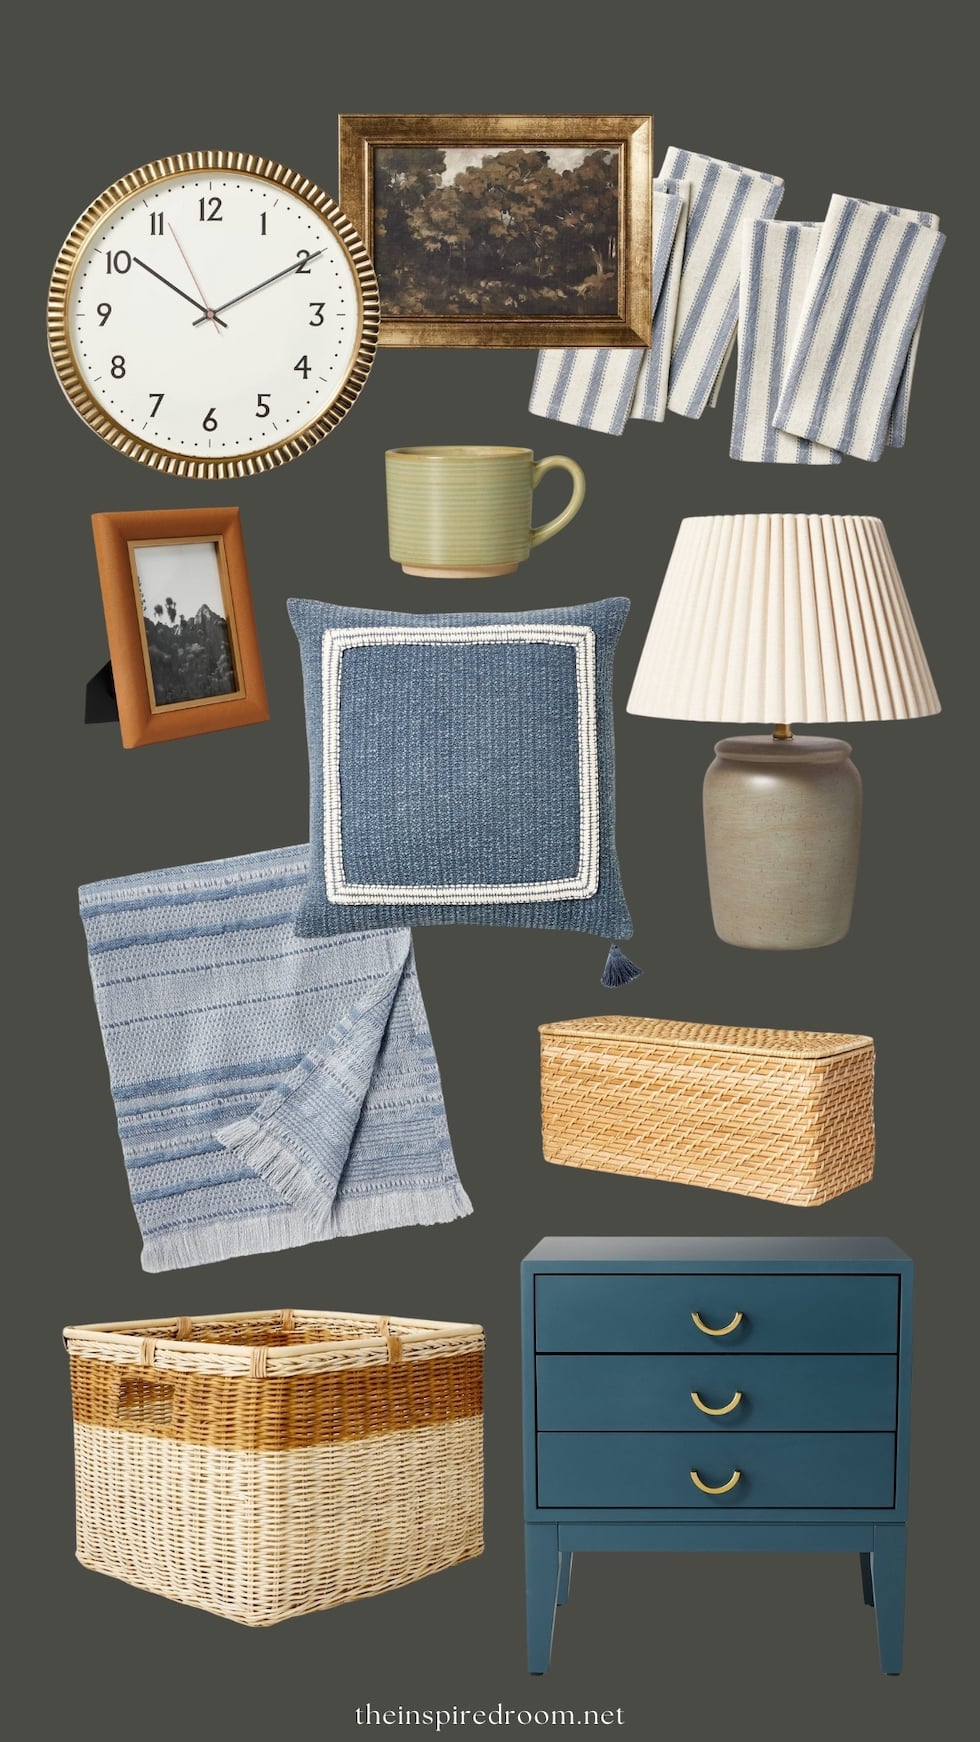 New Target Home Decor Finds + Style Mood Boards